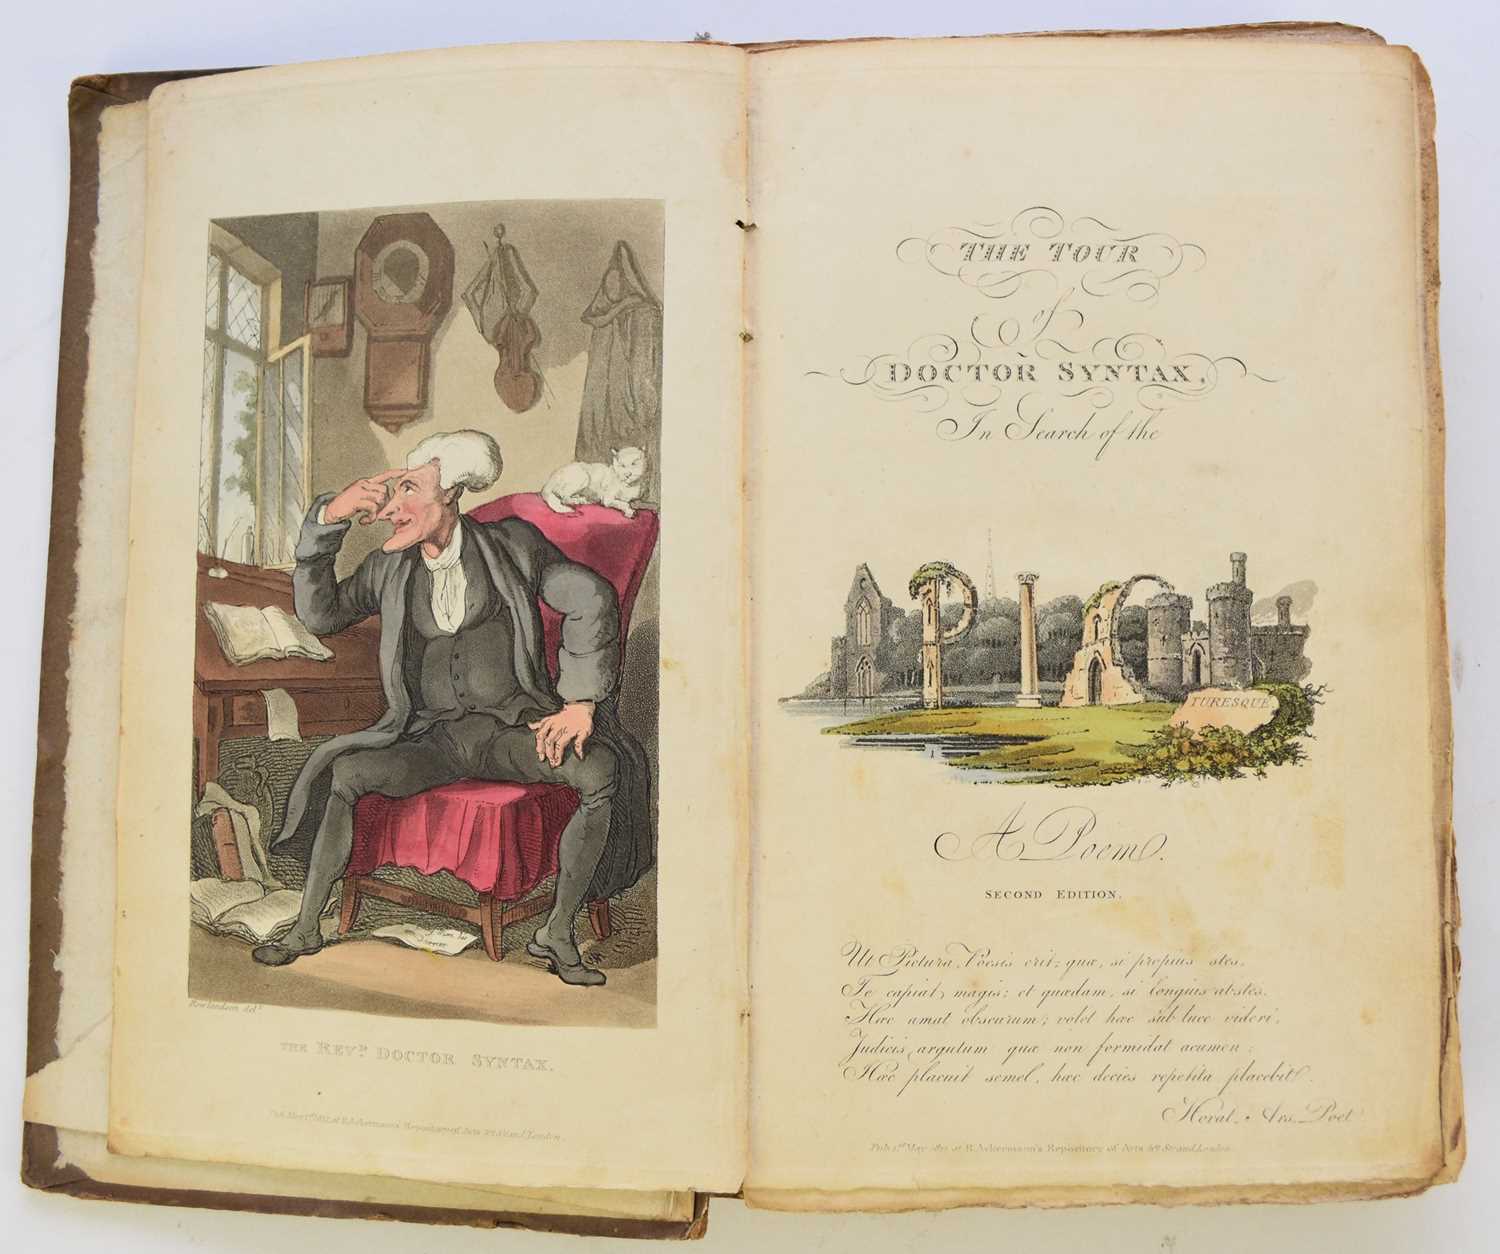 Lot 49 - COMBE, William, The Tour of Dr Syntax in Search of (1) The Picturesque (2) Consolation (3) a Wife. Illustrated by Thomas Rowlandson. 3 vols 1812-21. Hand-coloured plates.